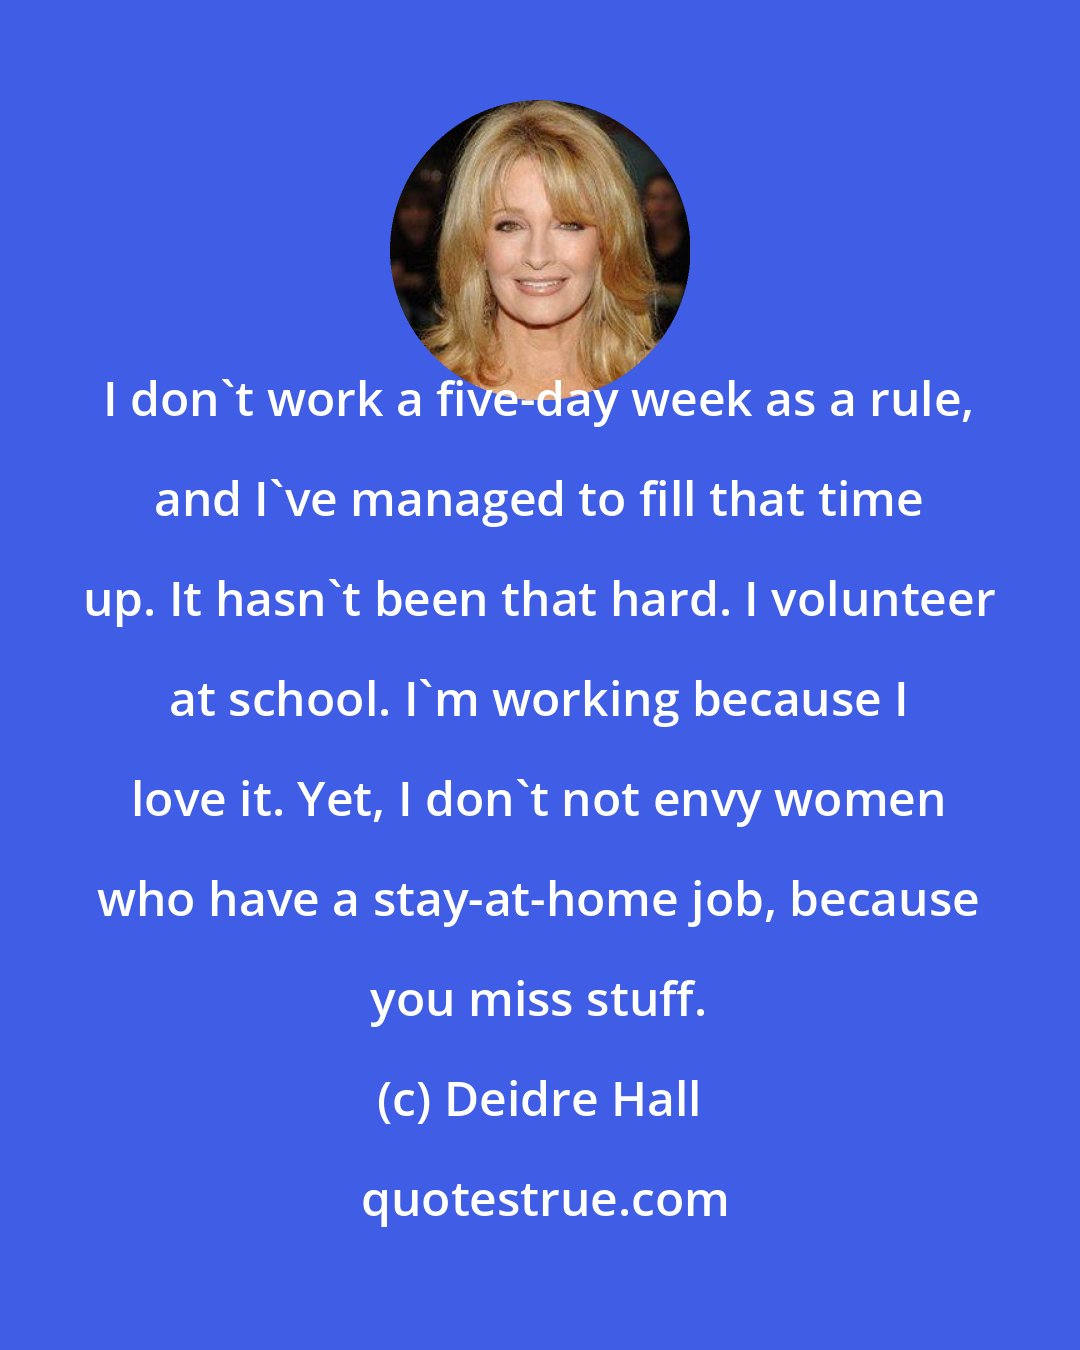 Deidre Hall: I don't work a five-day week as a rule, and I've managed to fill that time up. It hasn't been that hard. I volunteer at school. I'm working because I love it. Yet, I don't not envy women who have a stay-at-home job, because you miss stuff.